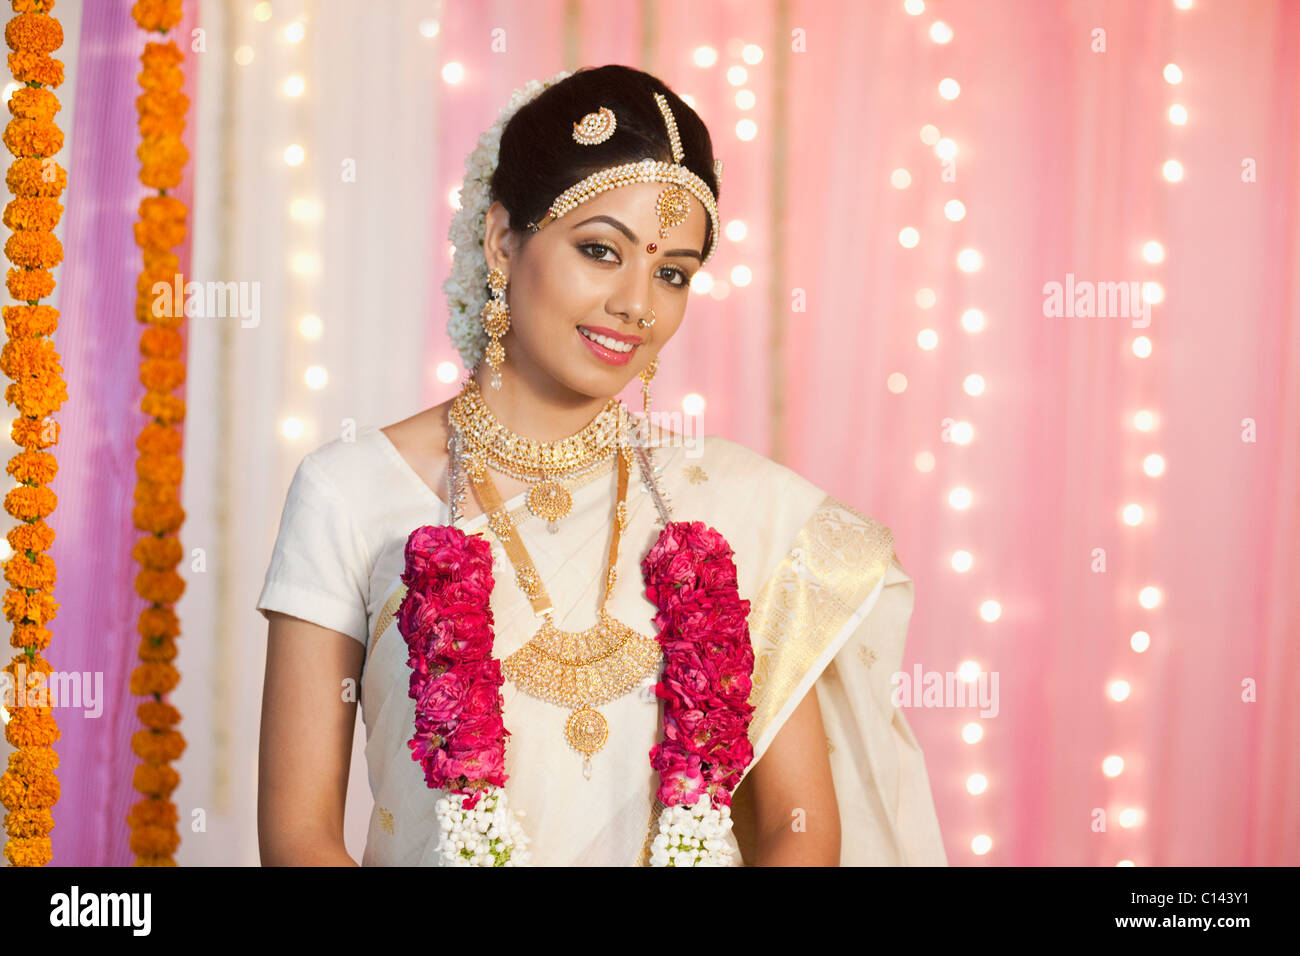 Portrait of a bride in traditional South Indian dress smiling Stock Photo